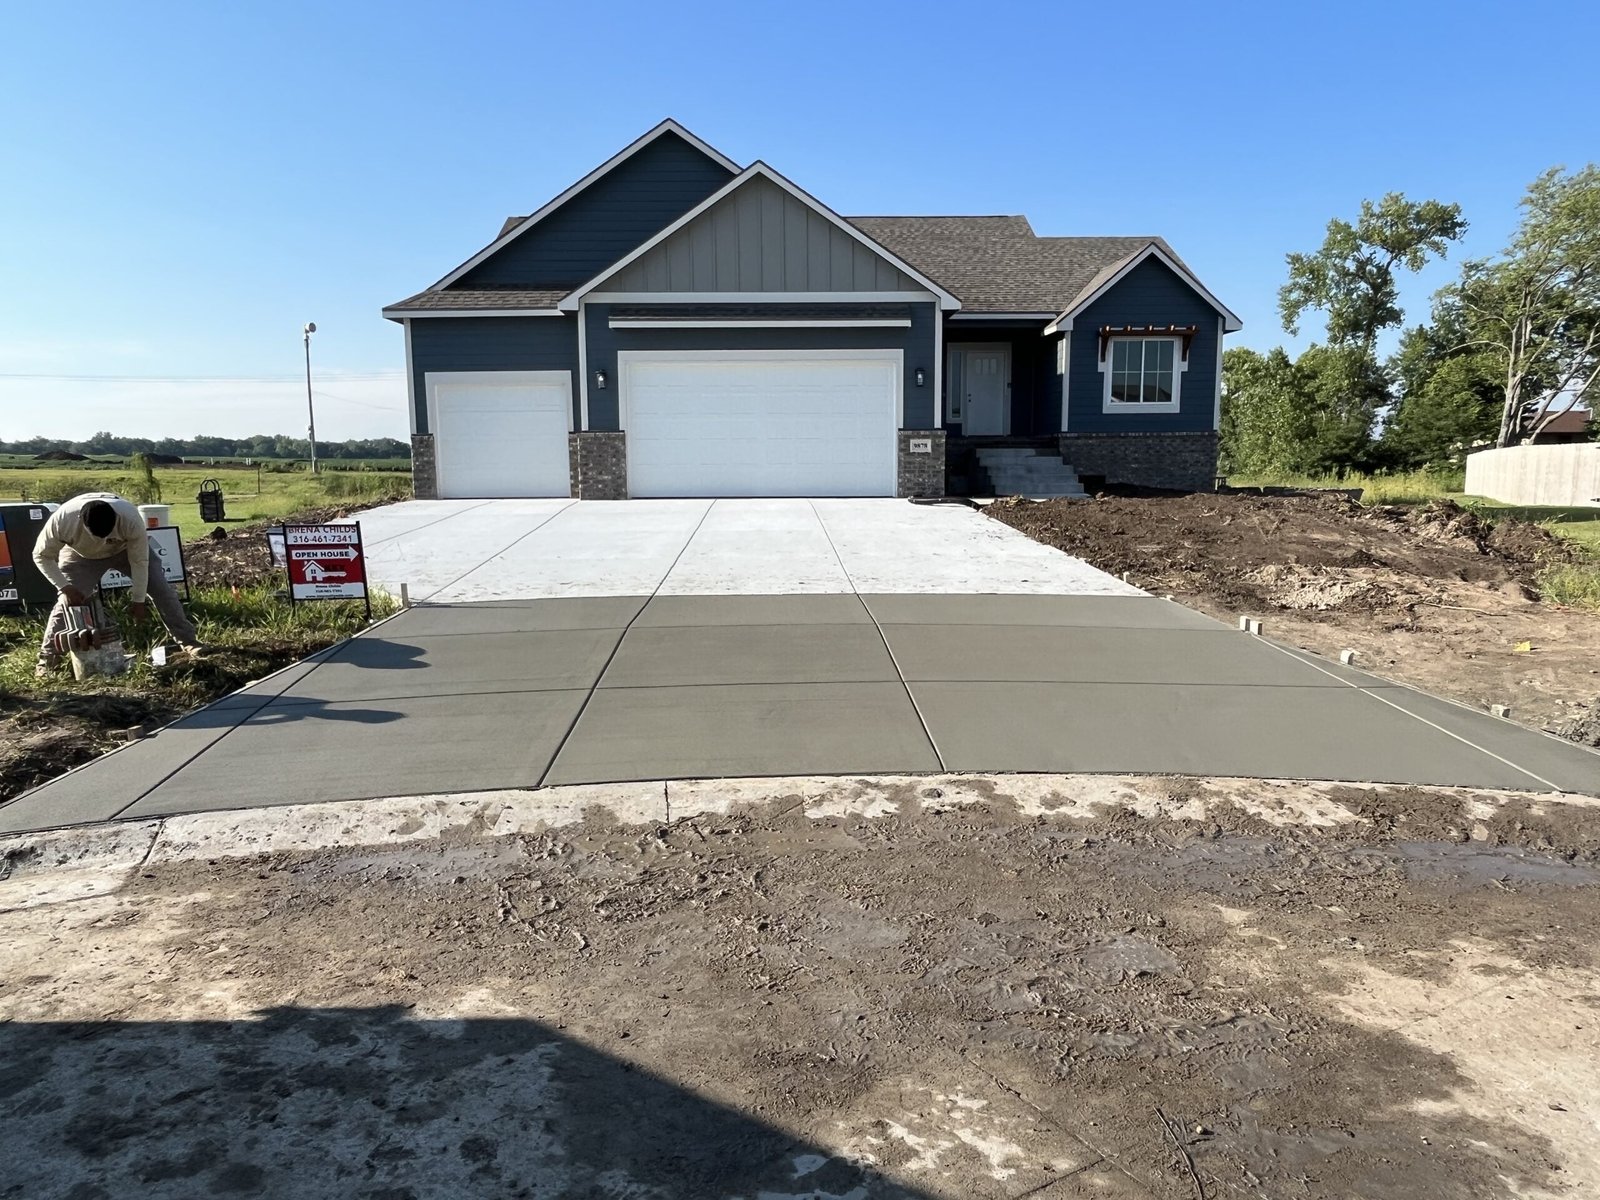 Driveway work and repair, Concrete work done by Concrete Contractor Generation Concrete in Manhattan Kansas 66502